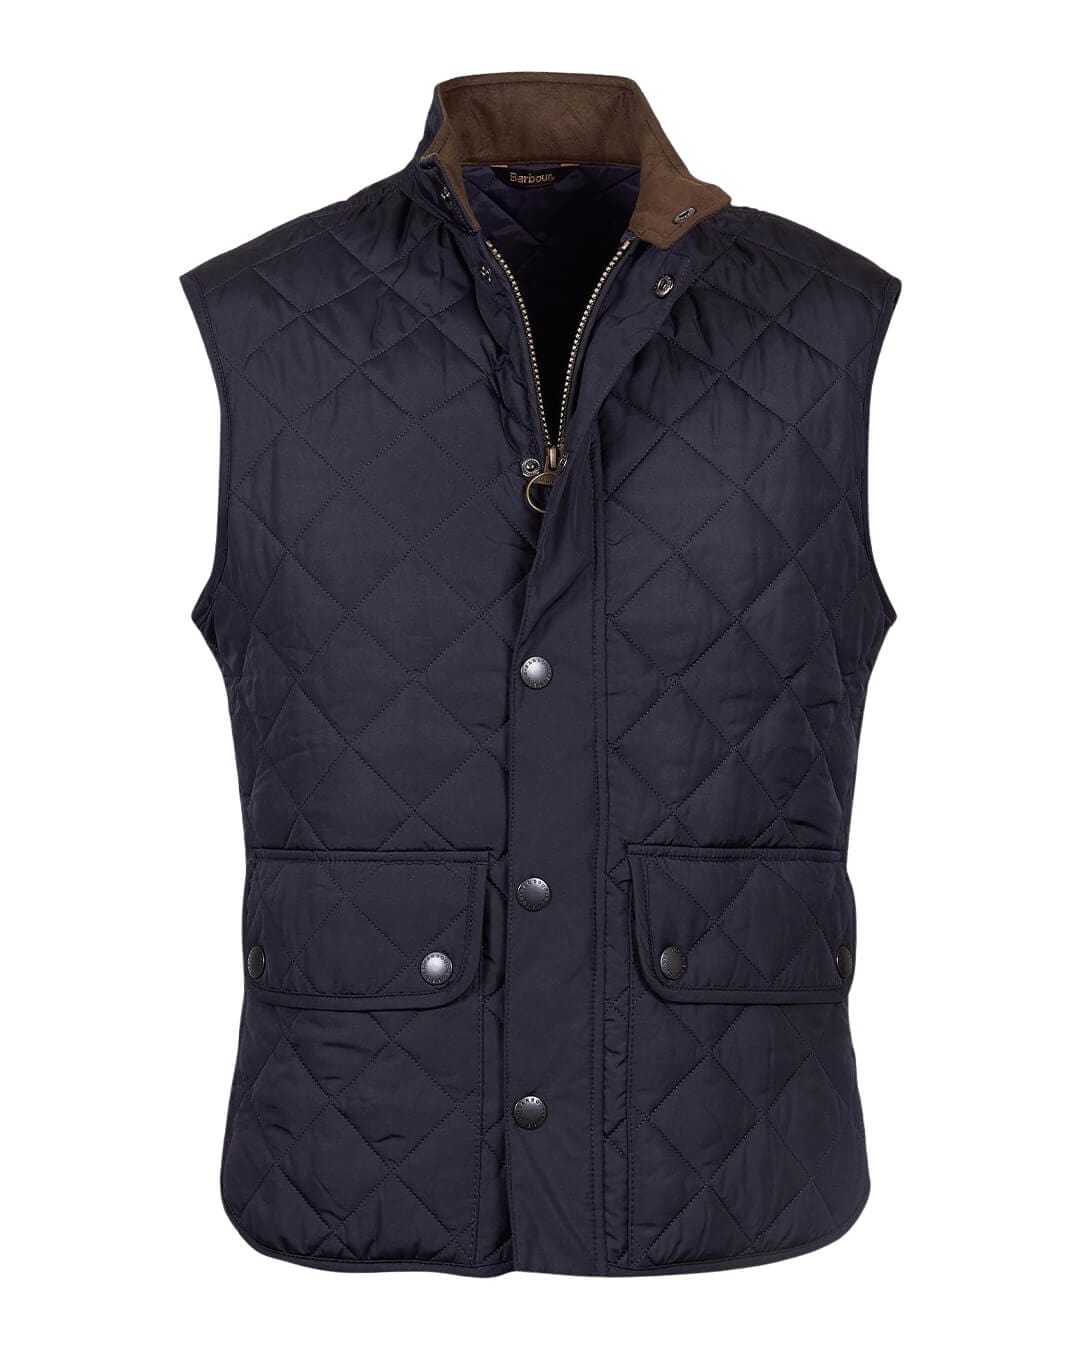 Barbour Outerwear Barbour Navy Lowerdale Gilet